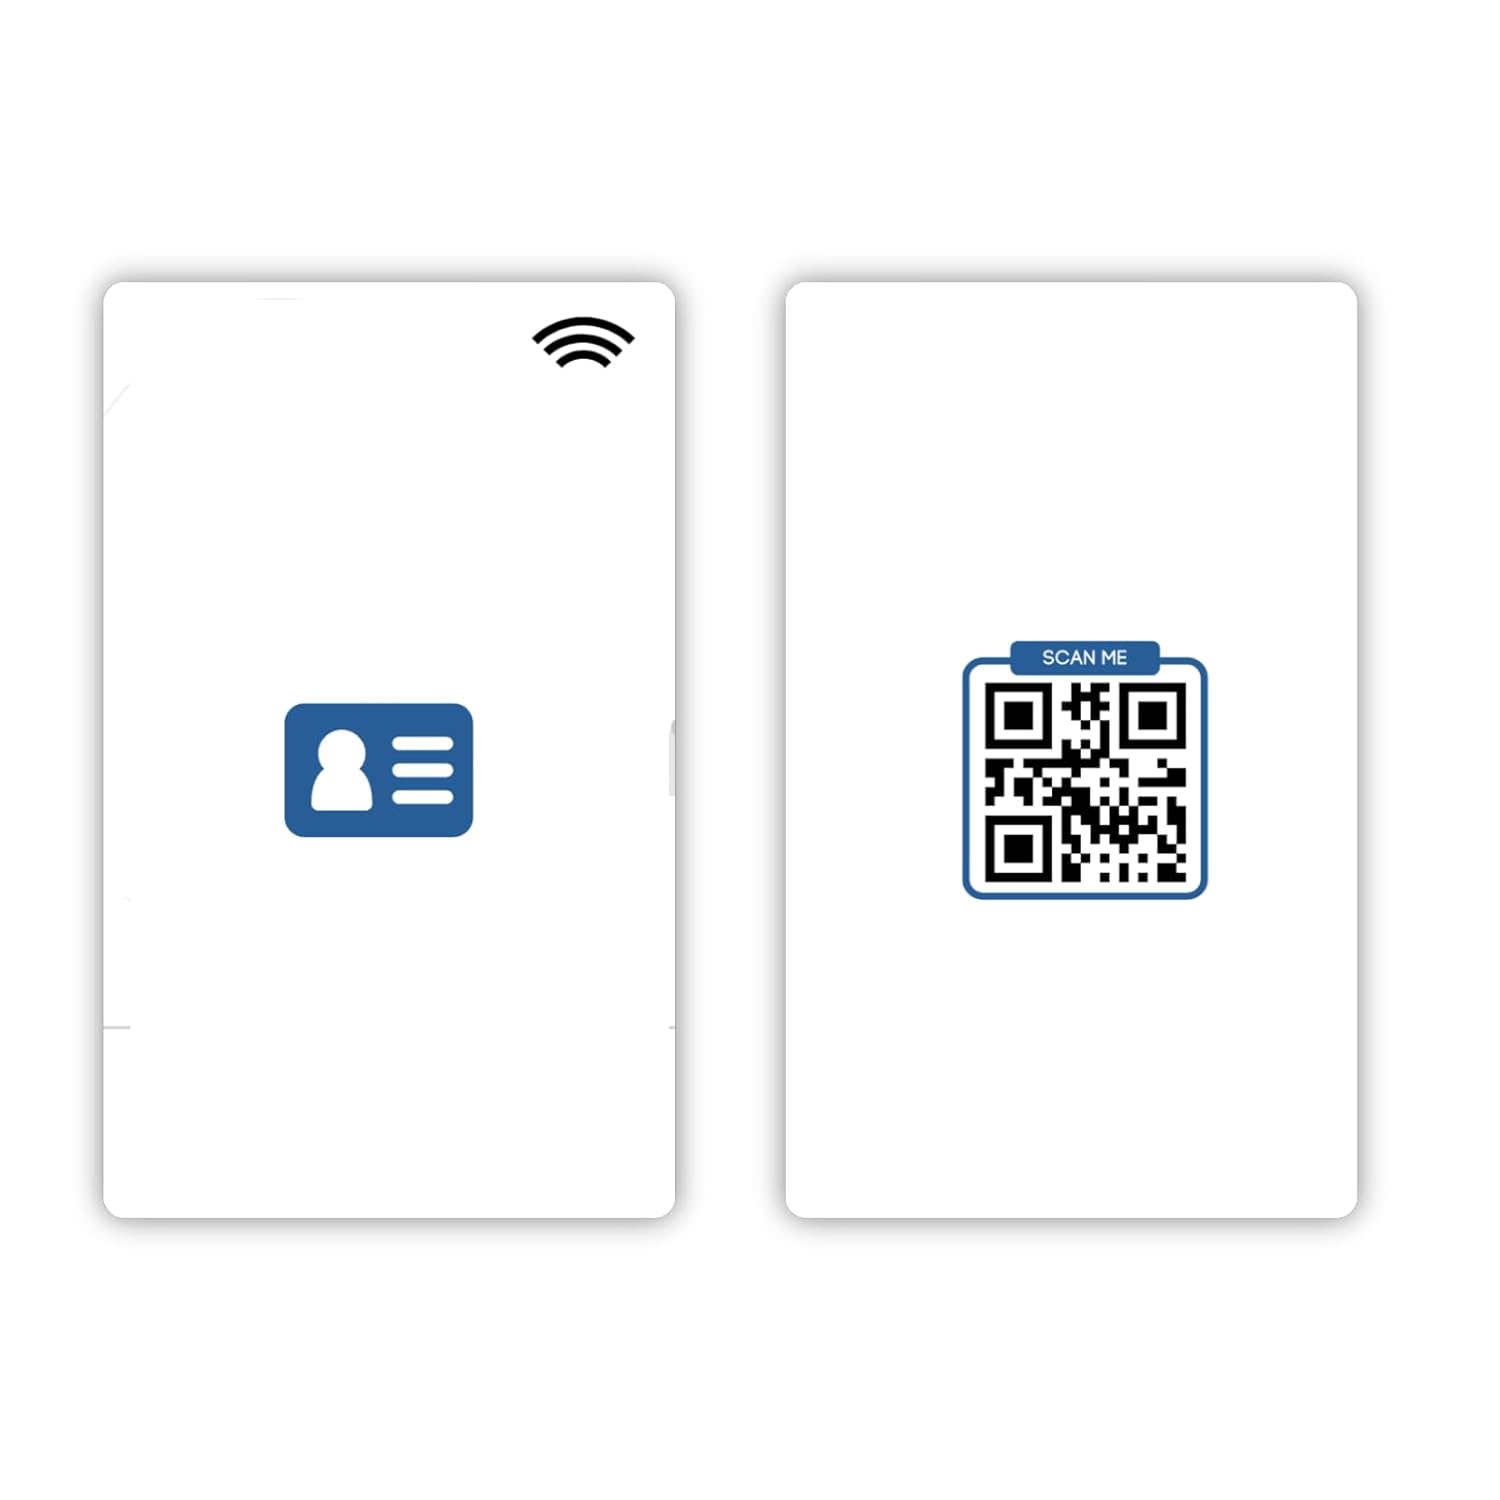 Business card NFC and QR enabled, Share contact with Tap or Scan, Premium Digital business card | Contact Card